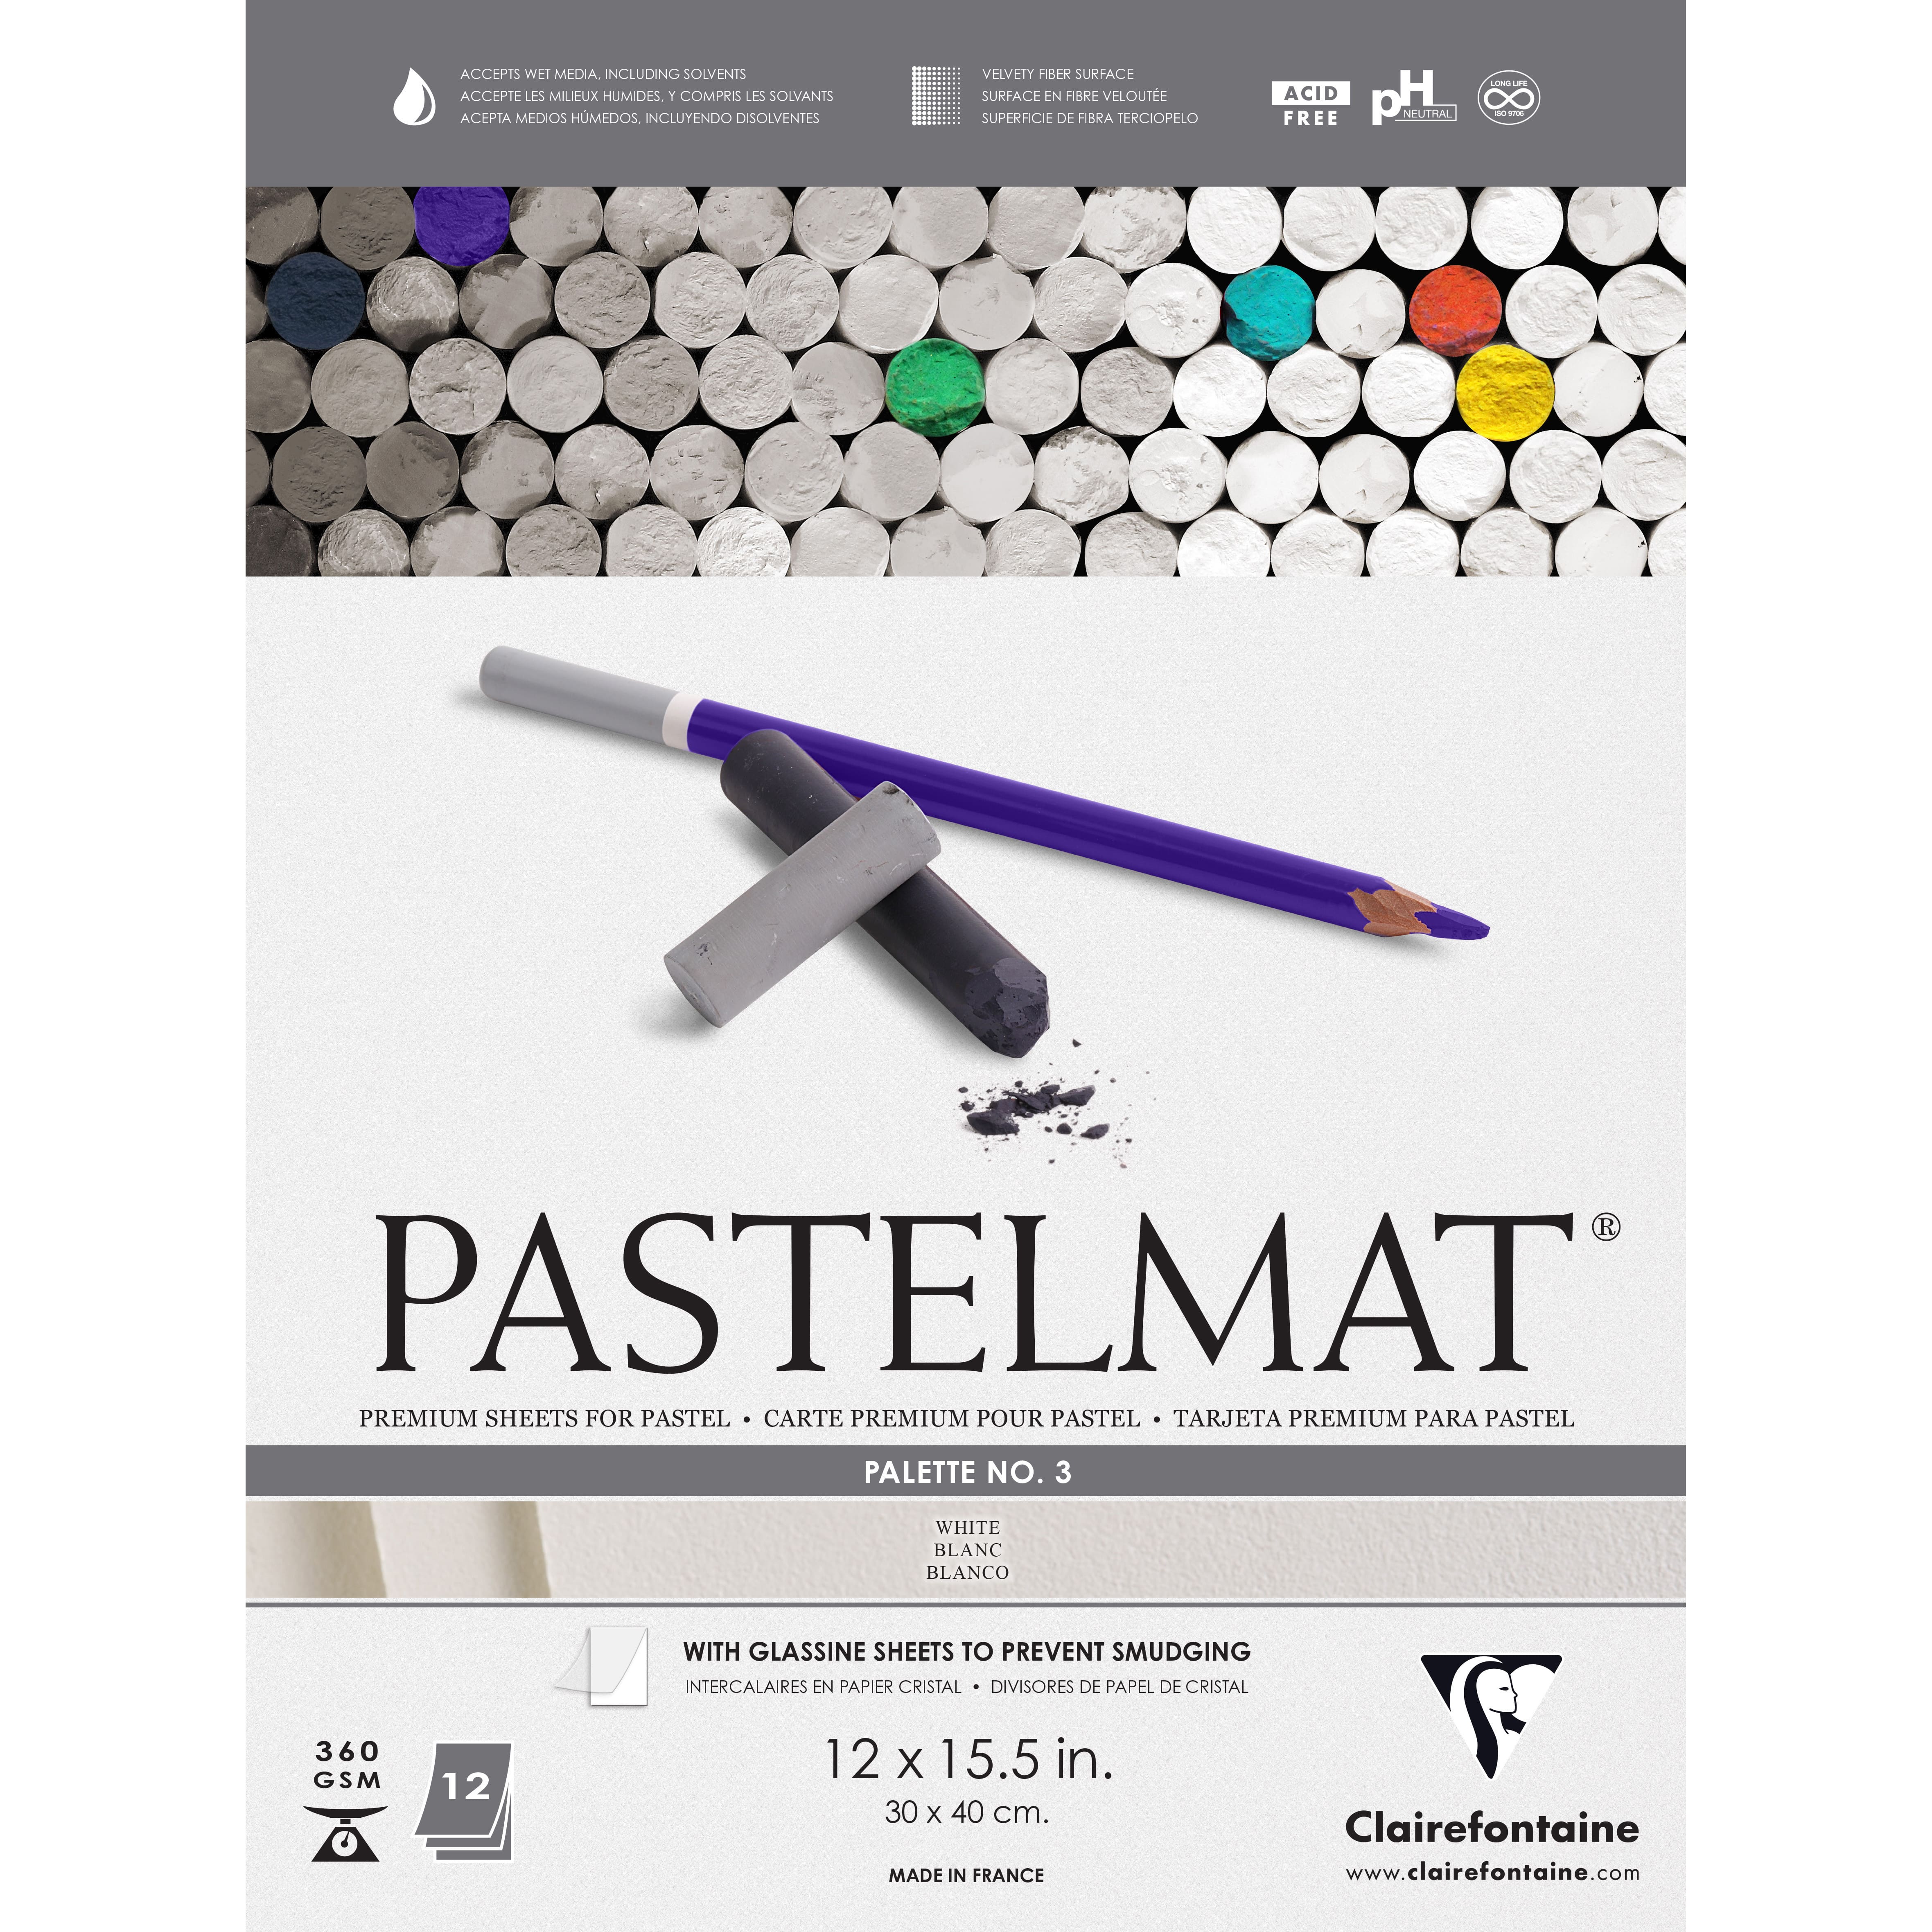 Clairefontaine Premium Pastelmat Pad, 9 inch x 12 inch, PL1, Other